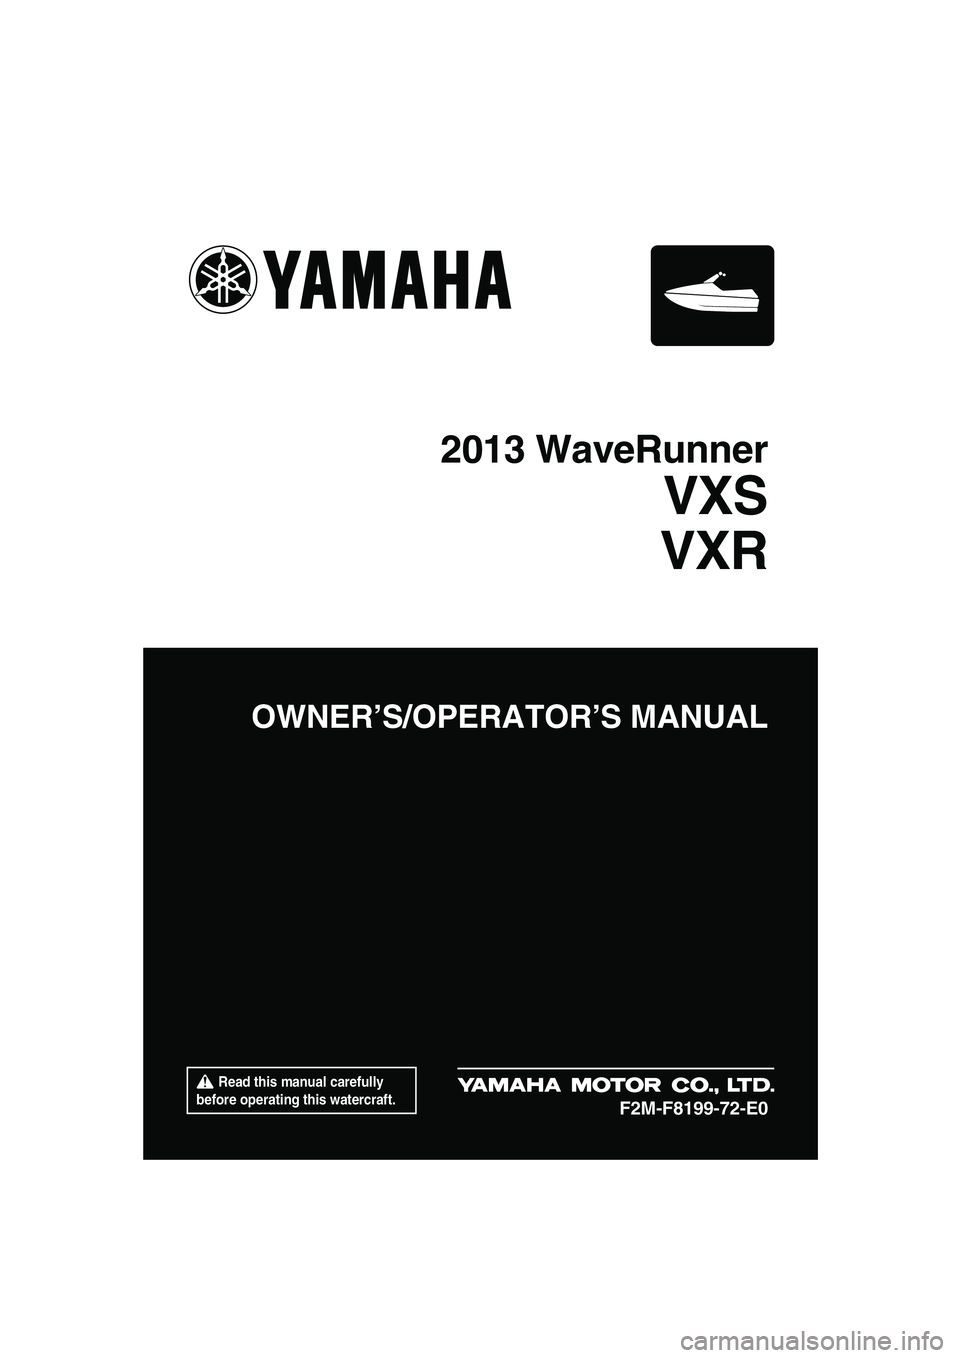 YAMAHA VXS 2013  Owners Manual  Read this manual carefully 
before operating this watercraft.
OWNER’S/OPERATOR’S MANUAL
2013 WaveRunner
VXS
VXR
F2M-F8199-72-E0
UF2M72E0.book  Page 1  Thursday, July 12, 2012  5:05 PM 